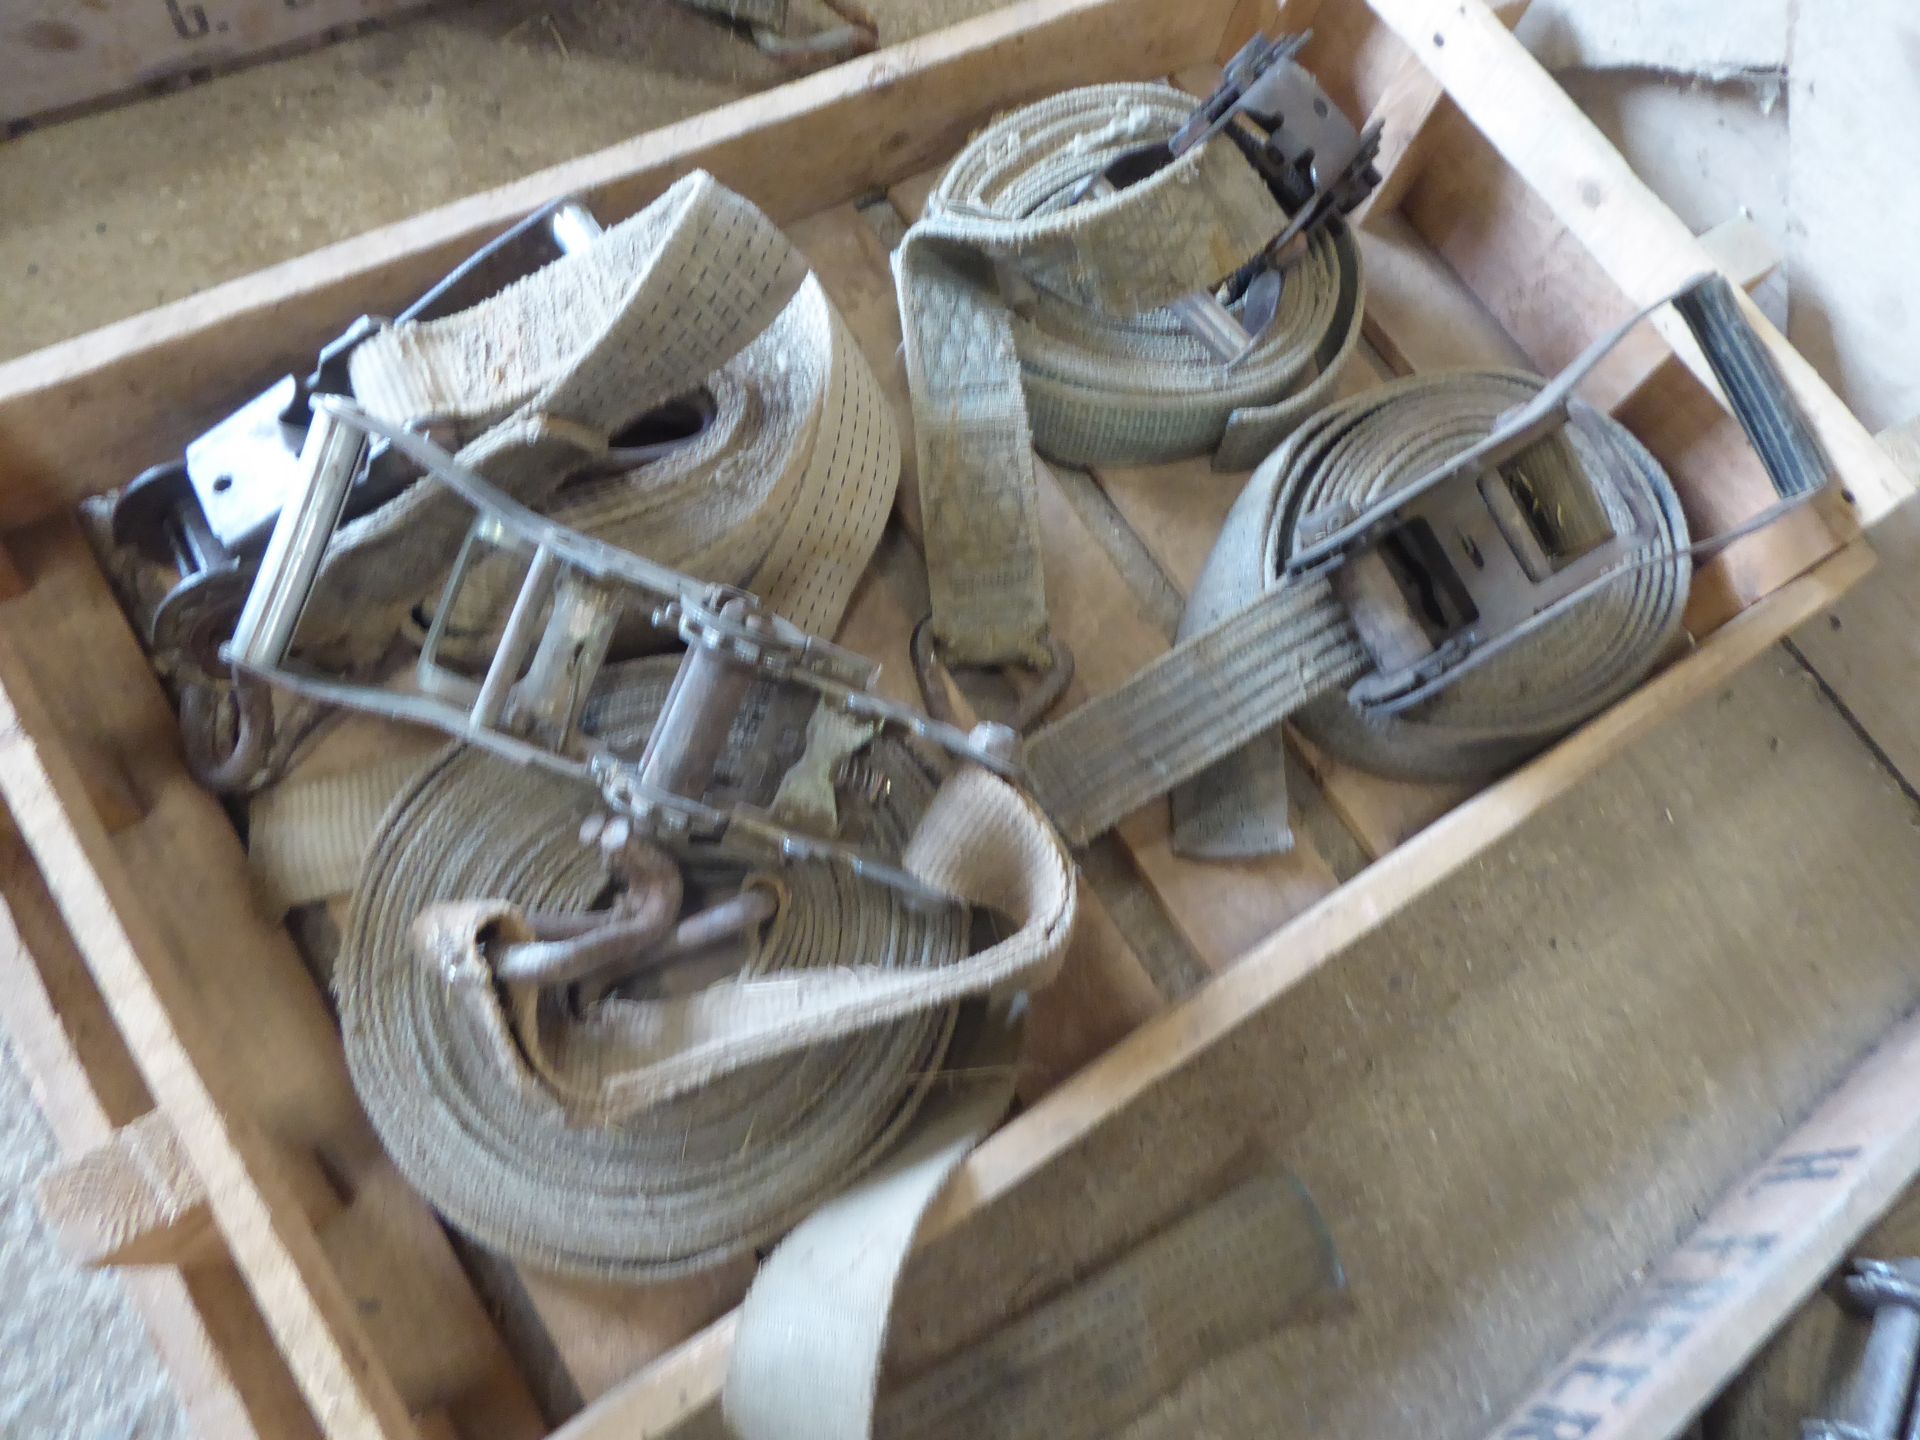 Tray of loading straps